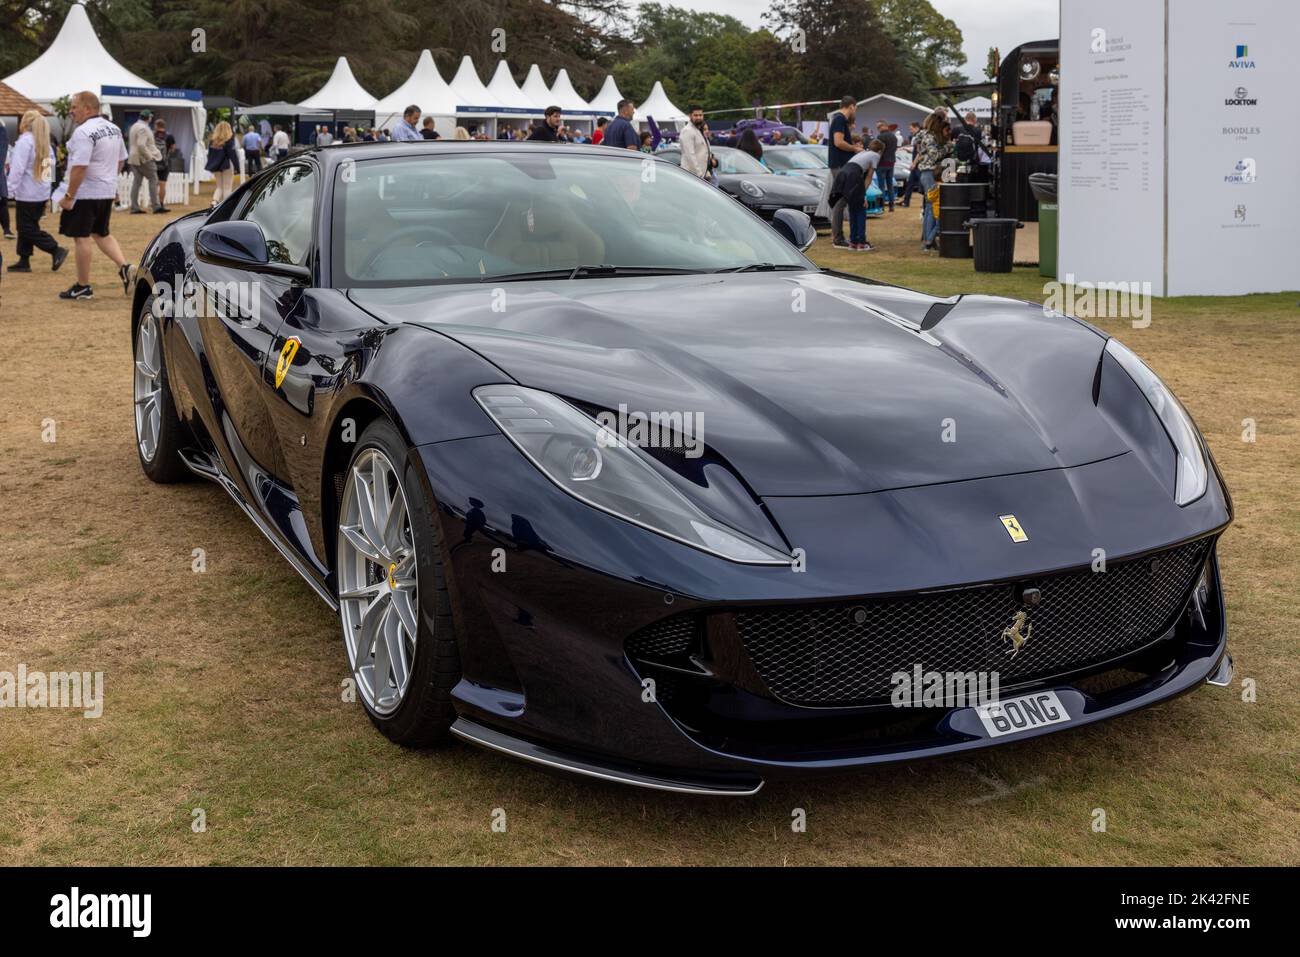 Ferrari 812 Superfast ‘6 ONG’ on display at the Salon Privé Concours d’Elégance motor show held at Blenheim Palace Stock Photo